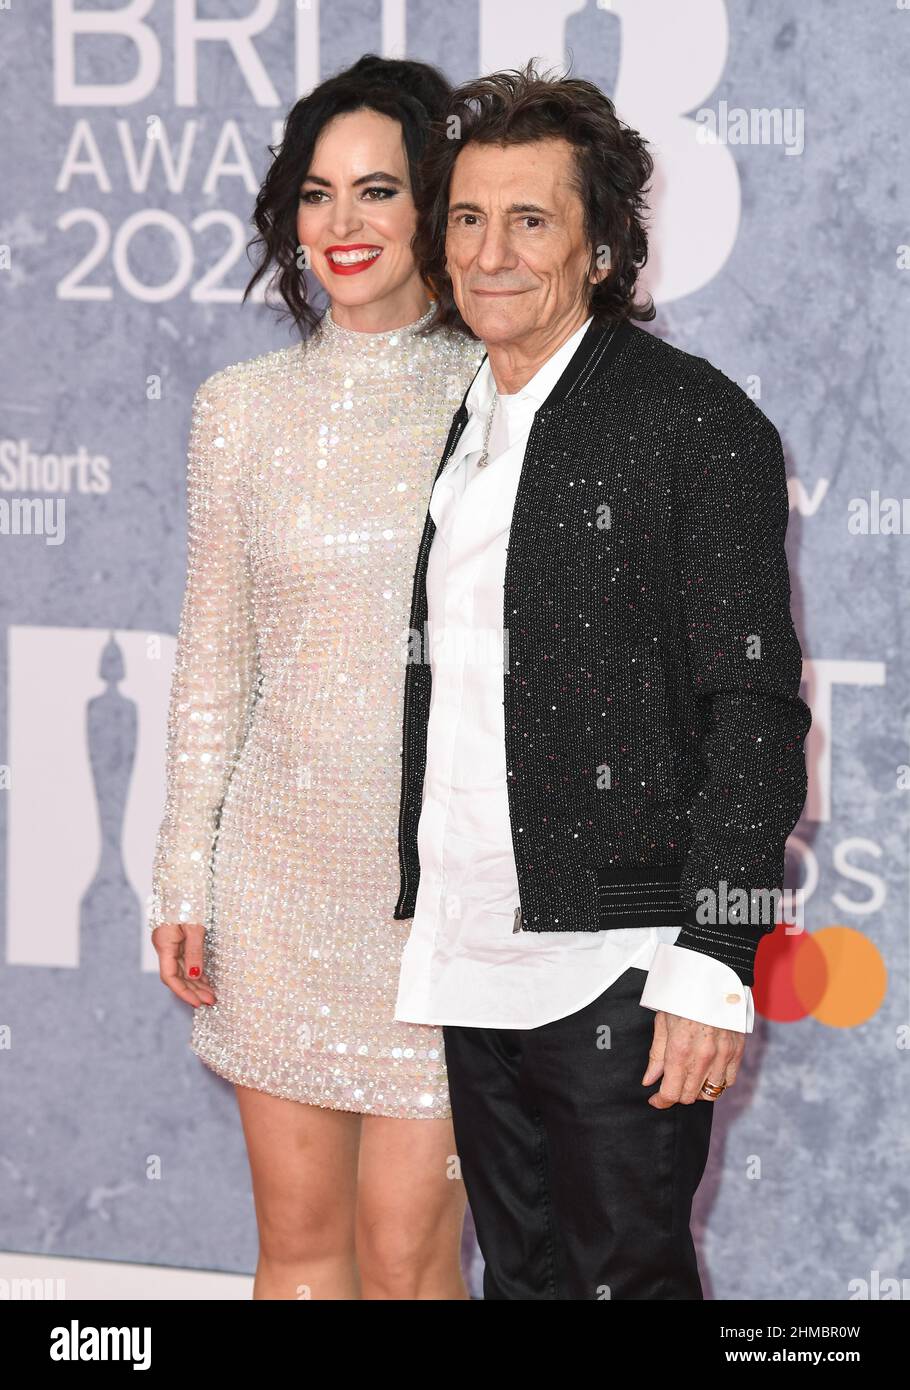 8th February, 2022. London, UK EDITORIAL USE ONLY Ronnie Wood and Sally Humphreys arriving at the BRIT Awards 2022 held at The O2, London. Credit: Doug Peters/EMPICS/Alamy Live News Stock Photo